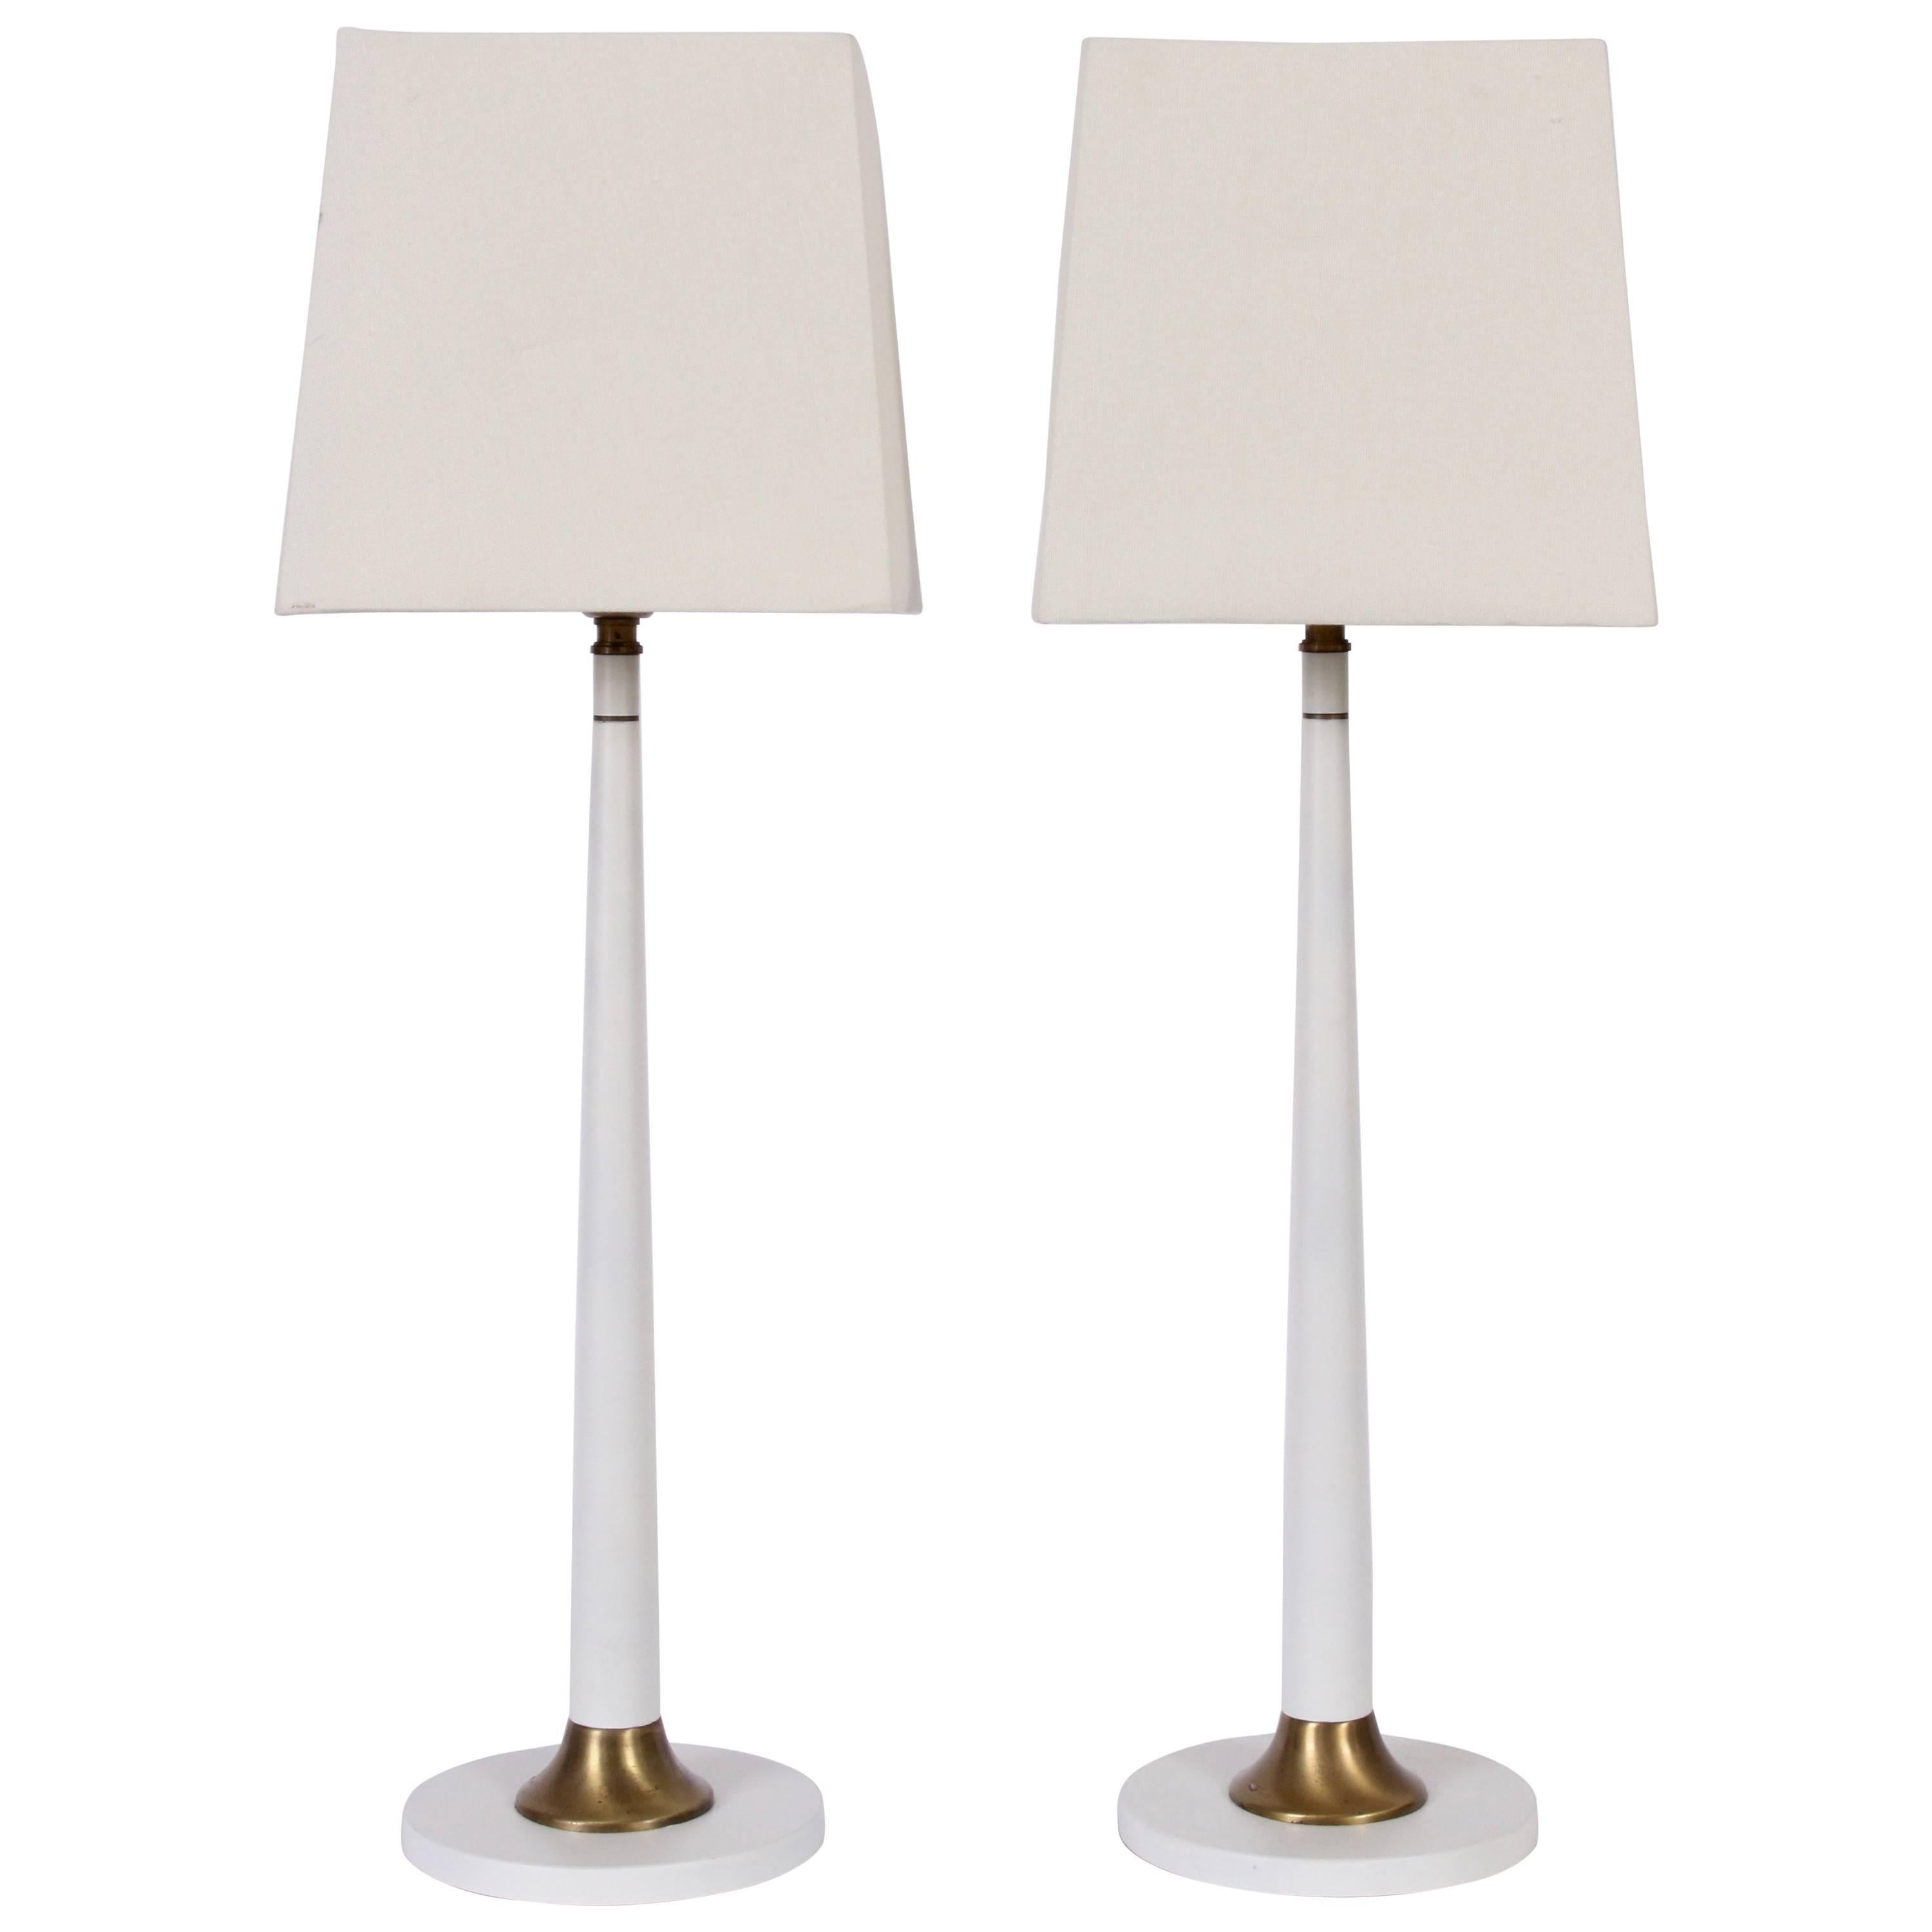 Tall Pair Rembrandt Lamp Co. White Candlestick Lamps with Glass Shades, 1950s